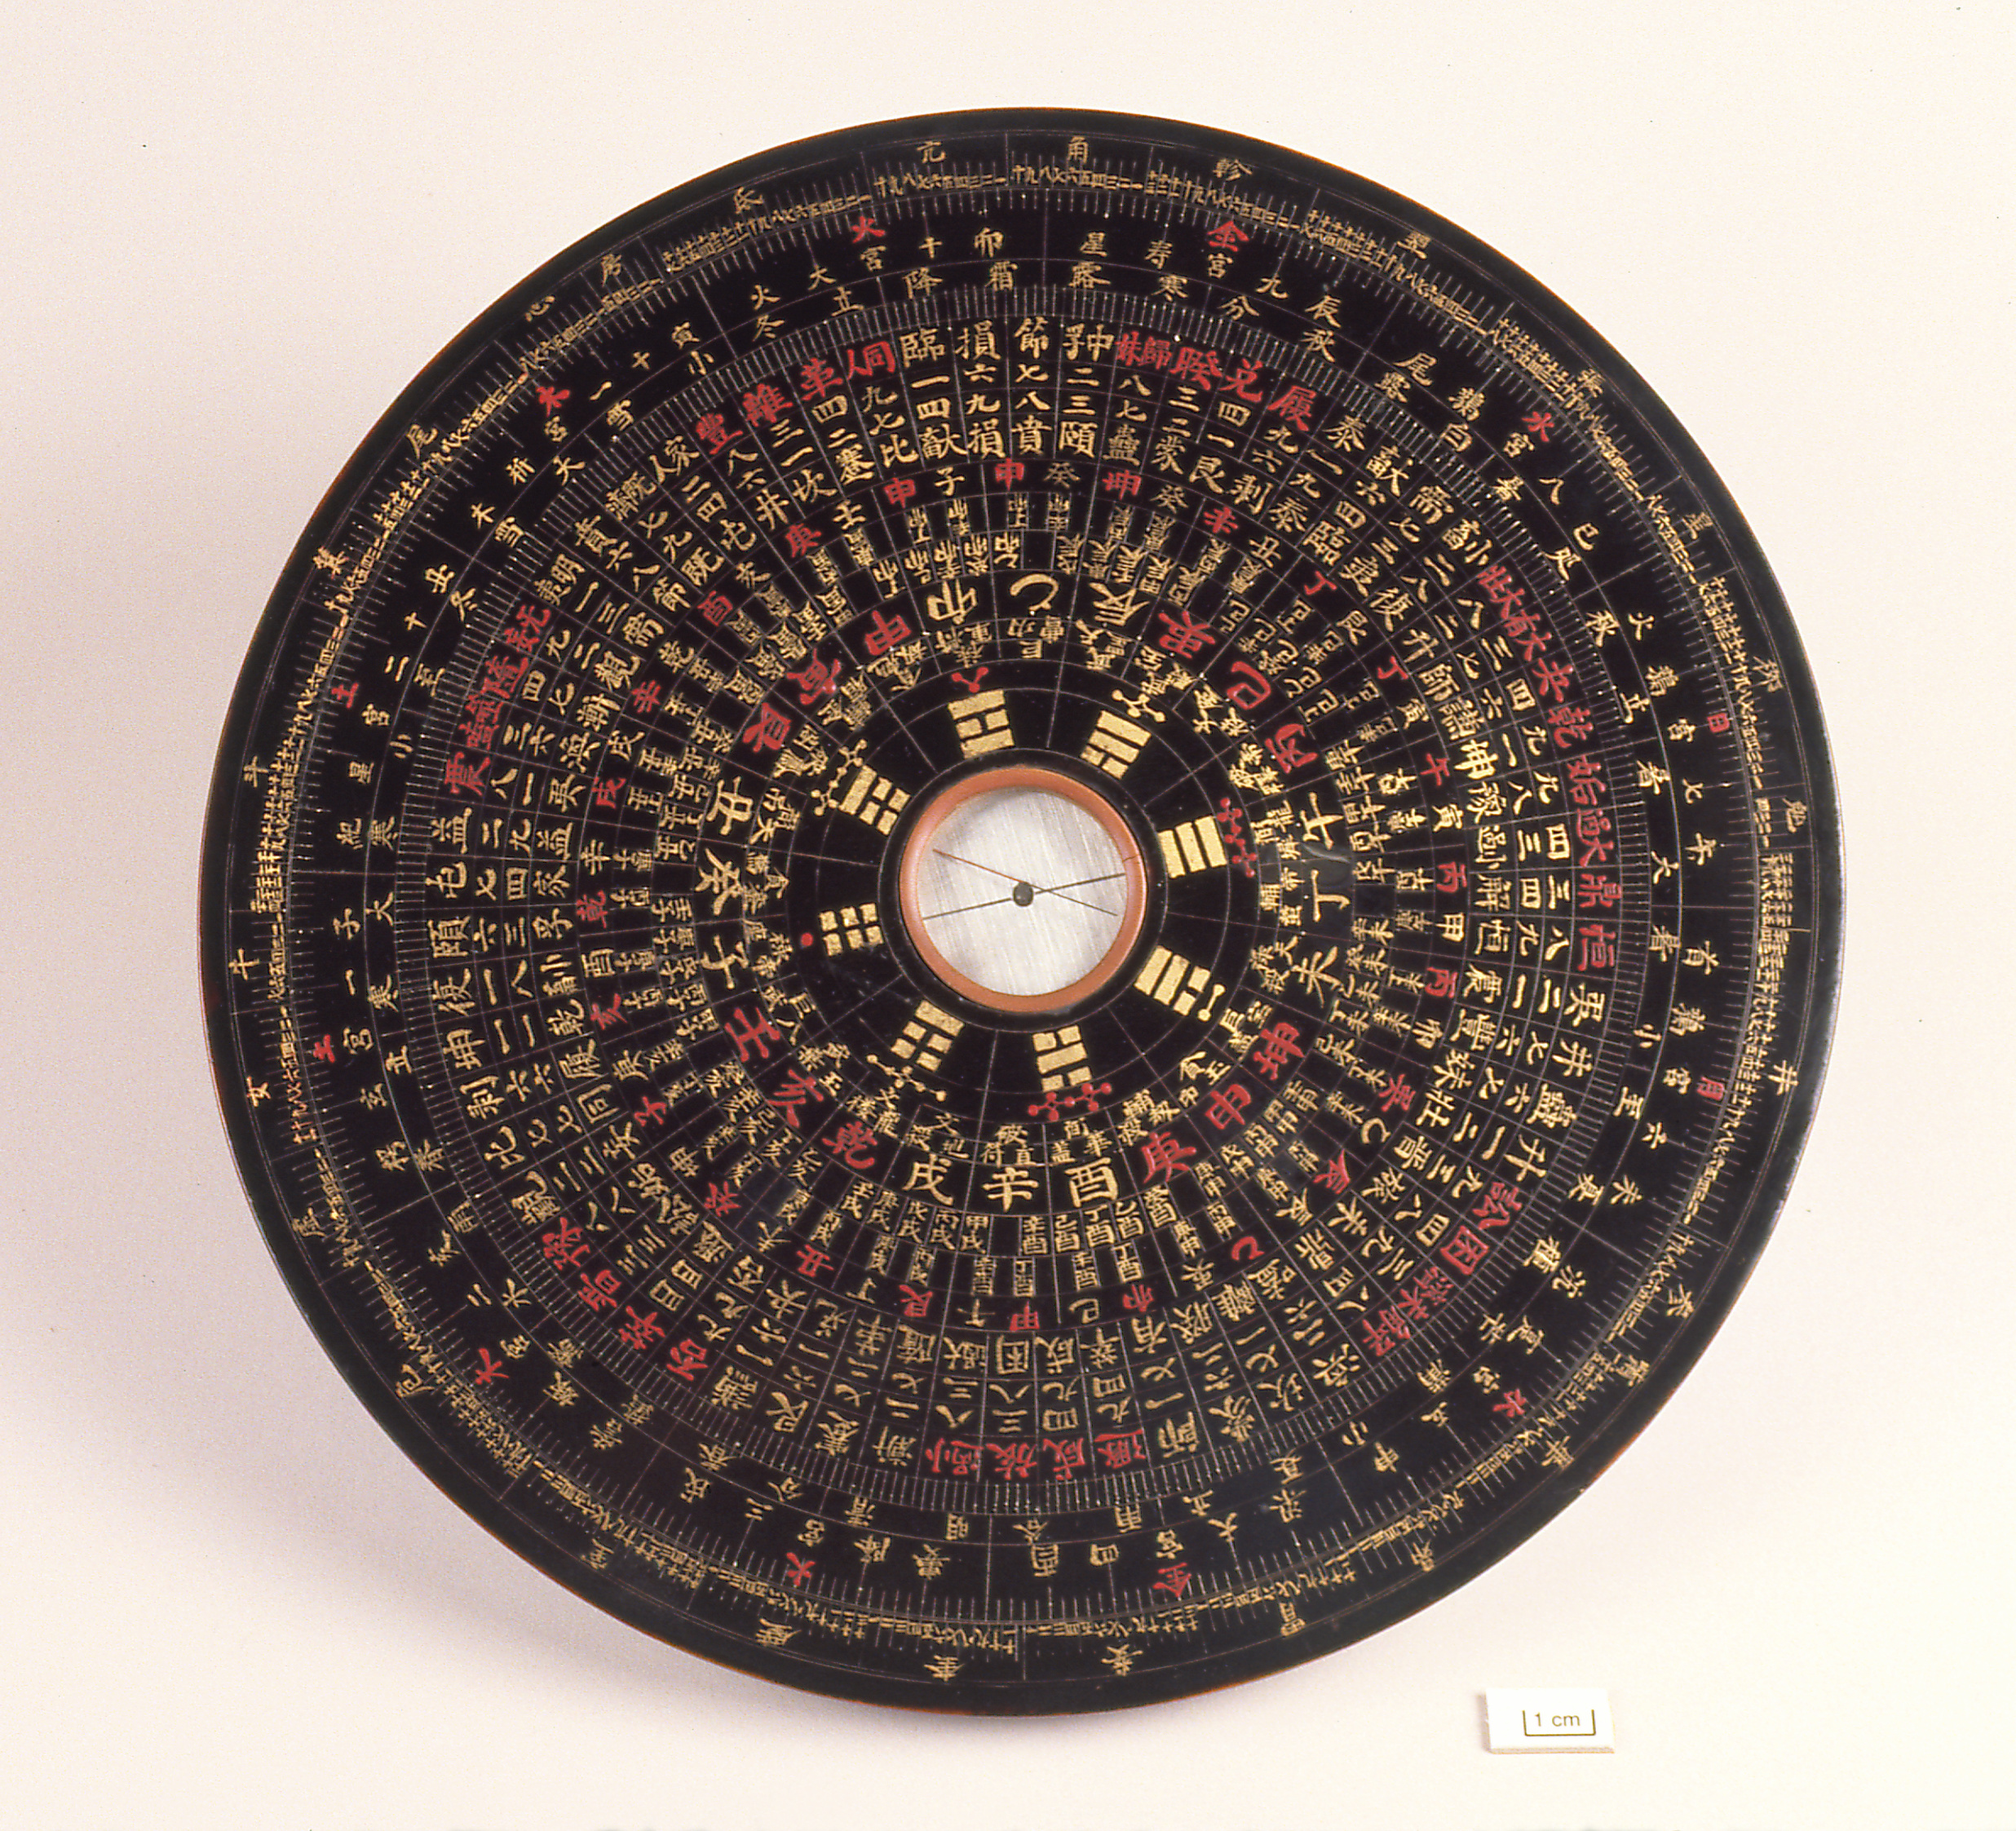 19th century Chinese astrological compass